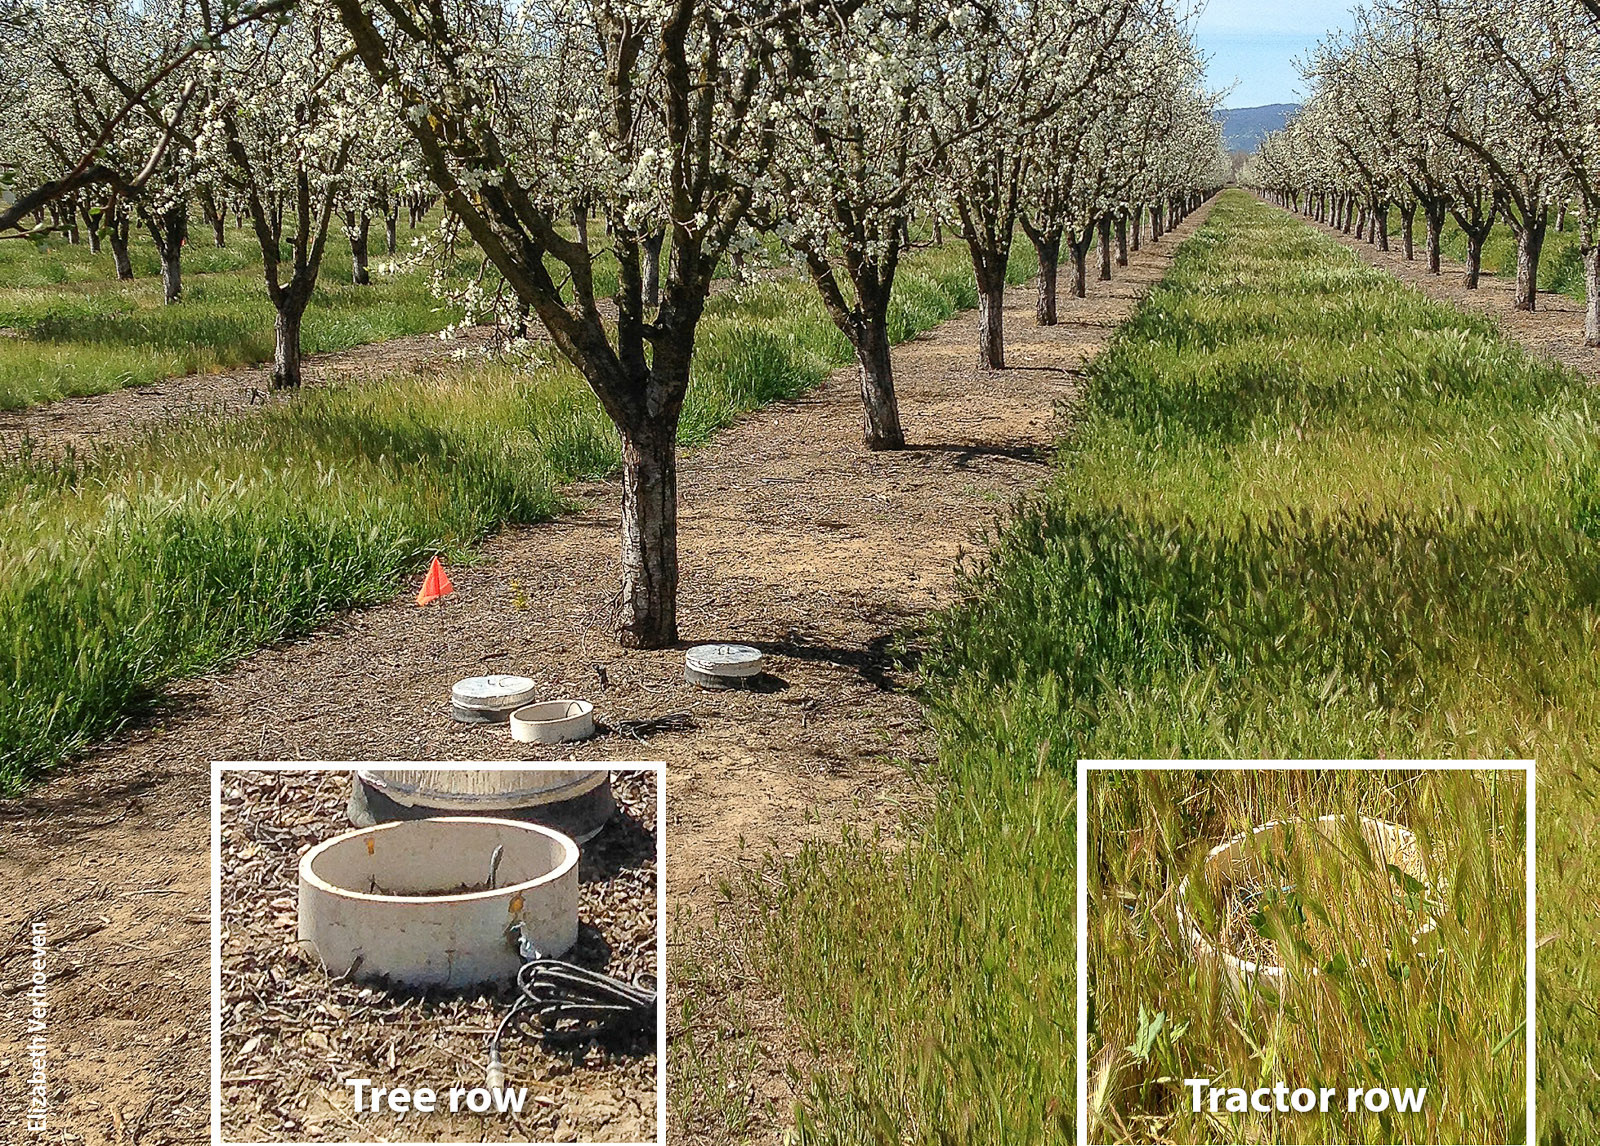 Gas flux chambers deployed in two functional locations — the tree row and tractor row — in a prune orchard. It is important to measure emissions from both locations because of differences in soil moisture, the availability of nitrogen compounds, soil temperature and other factors.